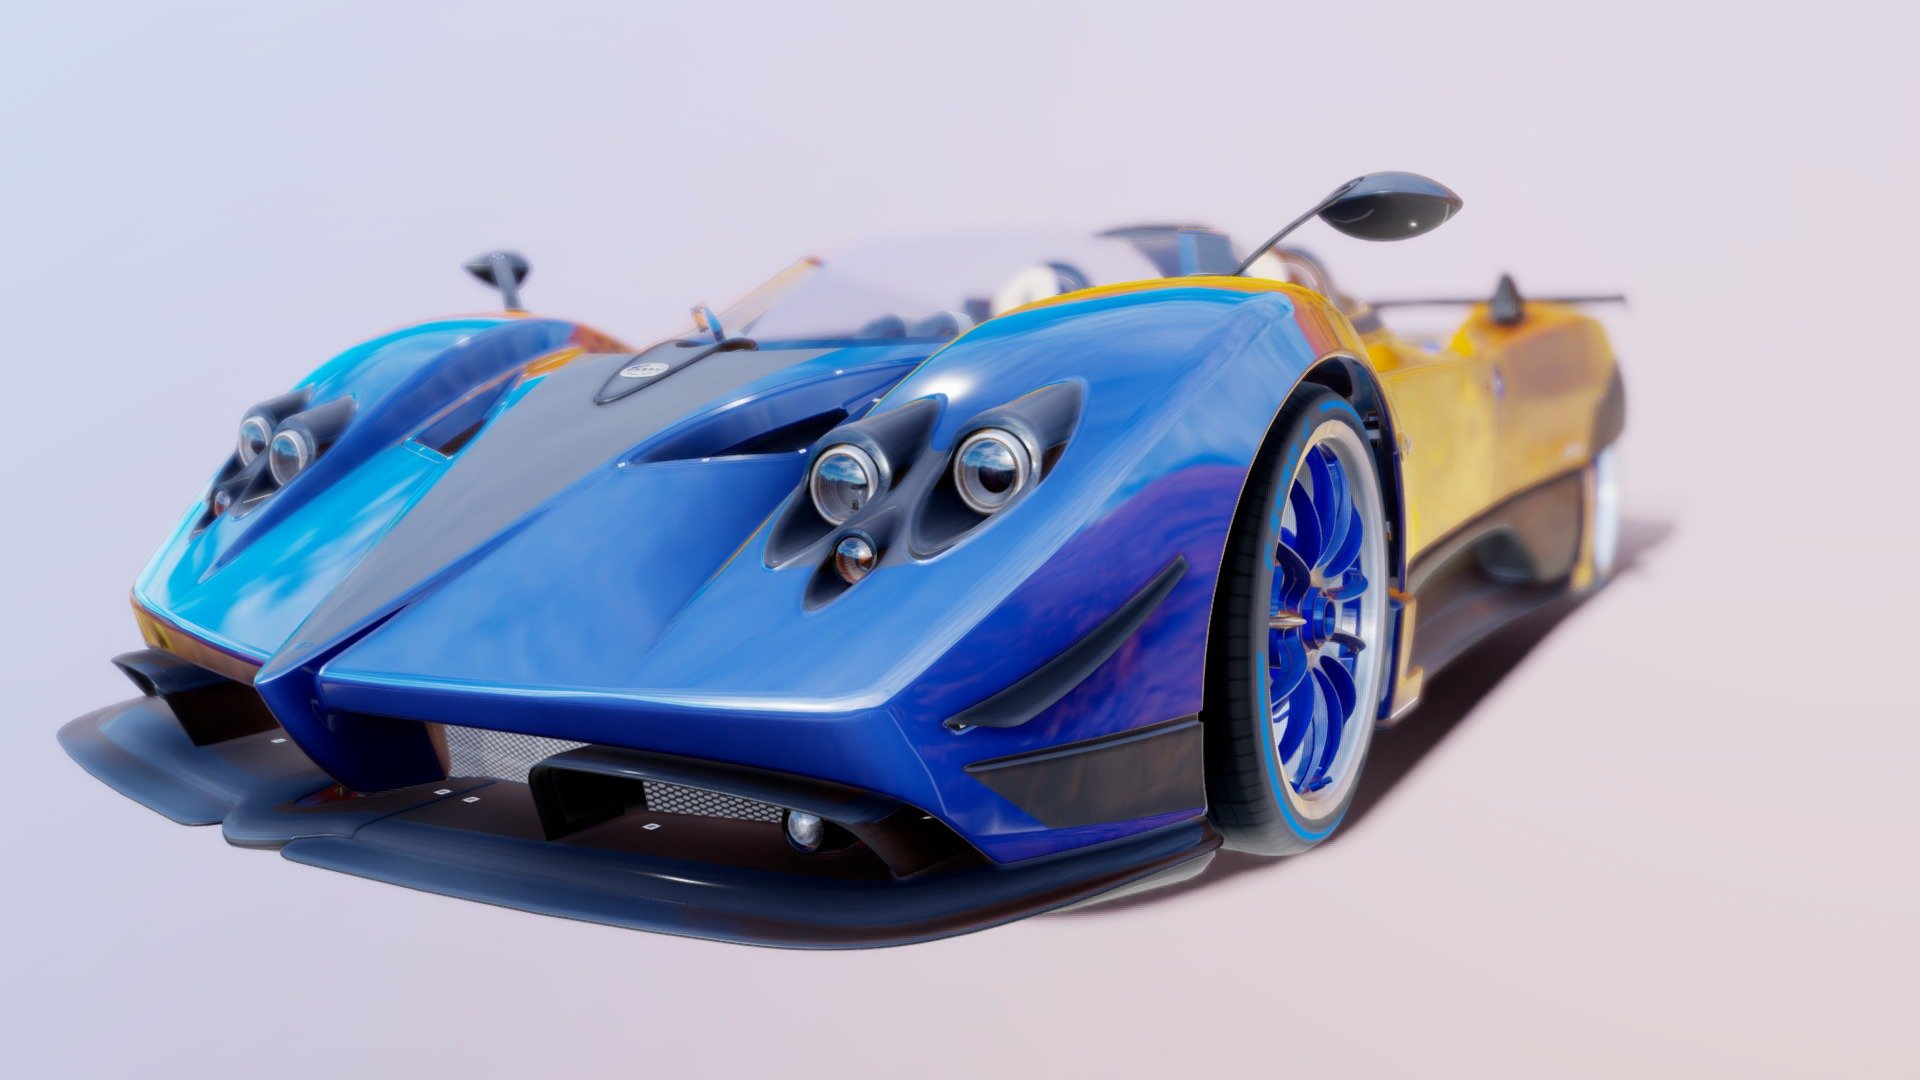 The Zonda HP Barchetta was unveiled at the 2017 Pebble Beach Concours d’Elegance as a present to the company’s founder, Horacio Pagani for his 60th birthday as well as to commemorate the 18th anniversary of the Zonda. It has unique exterior design cues which makes it different from other Zondas produced with the most distinguishable features being the barchetta body style and rear wheel covers inspired by group C race cars, making it the first Pagani to ever use this styling. It also has a rear spoiler, air intakes and rear lights taken from the 760 series cars 3d model